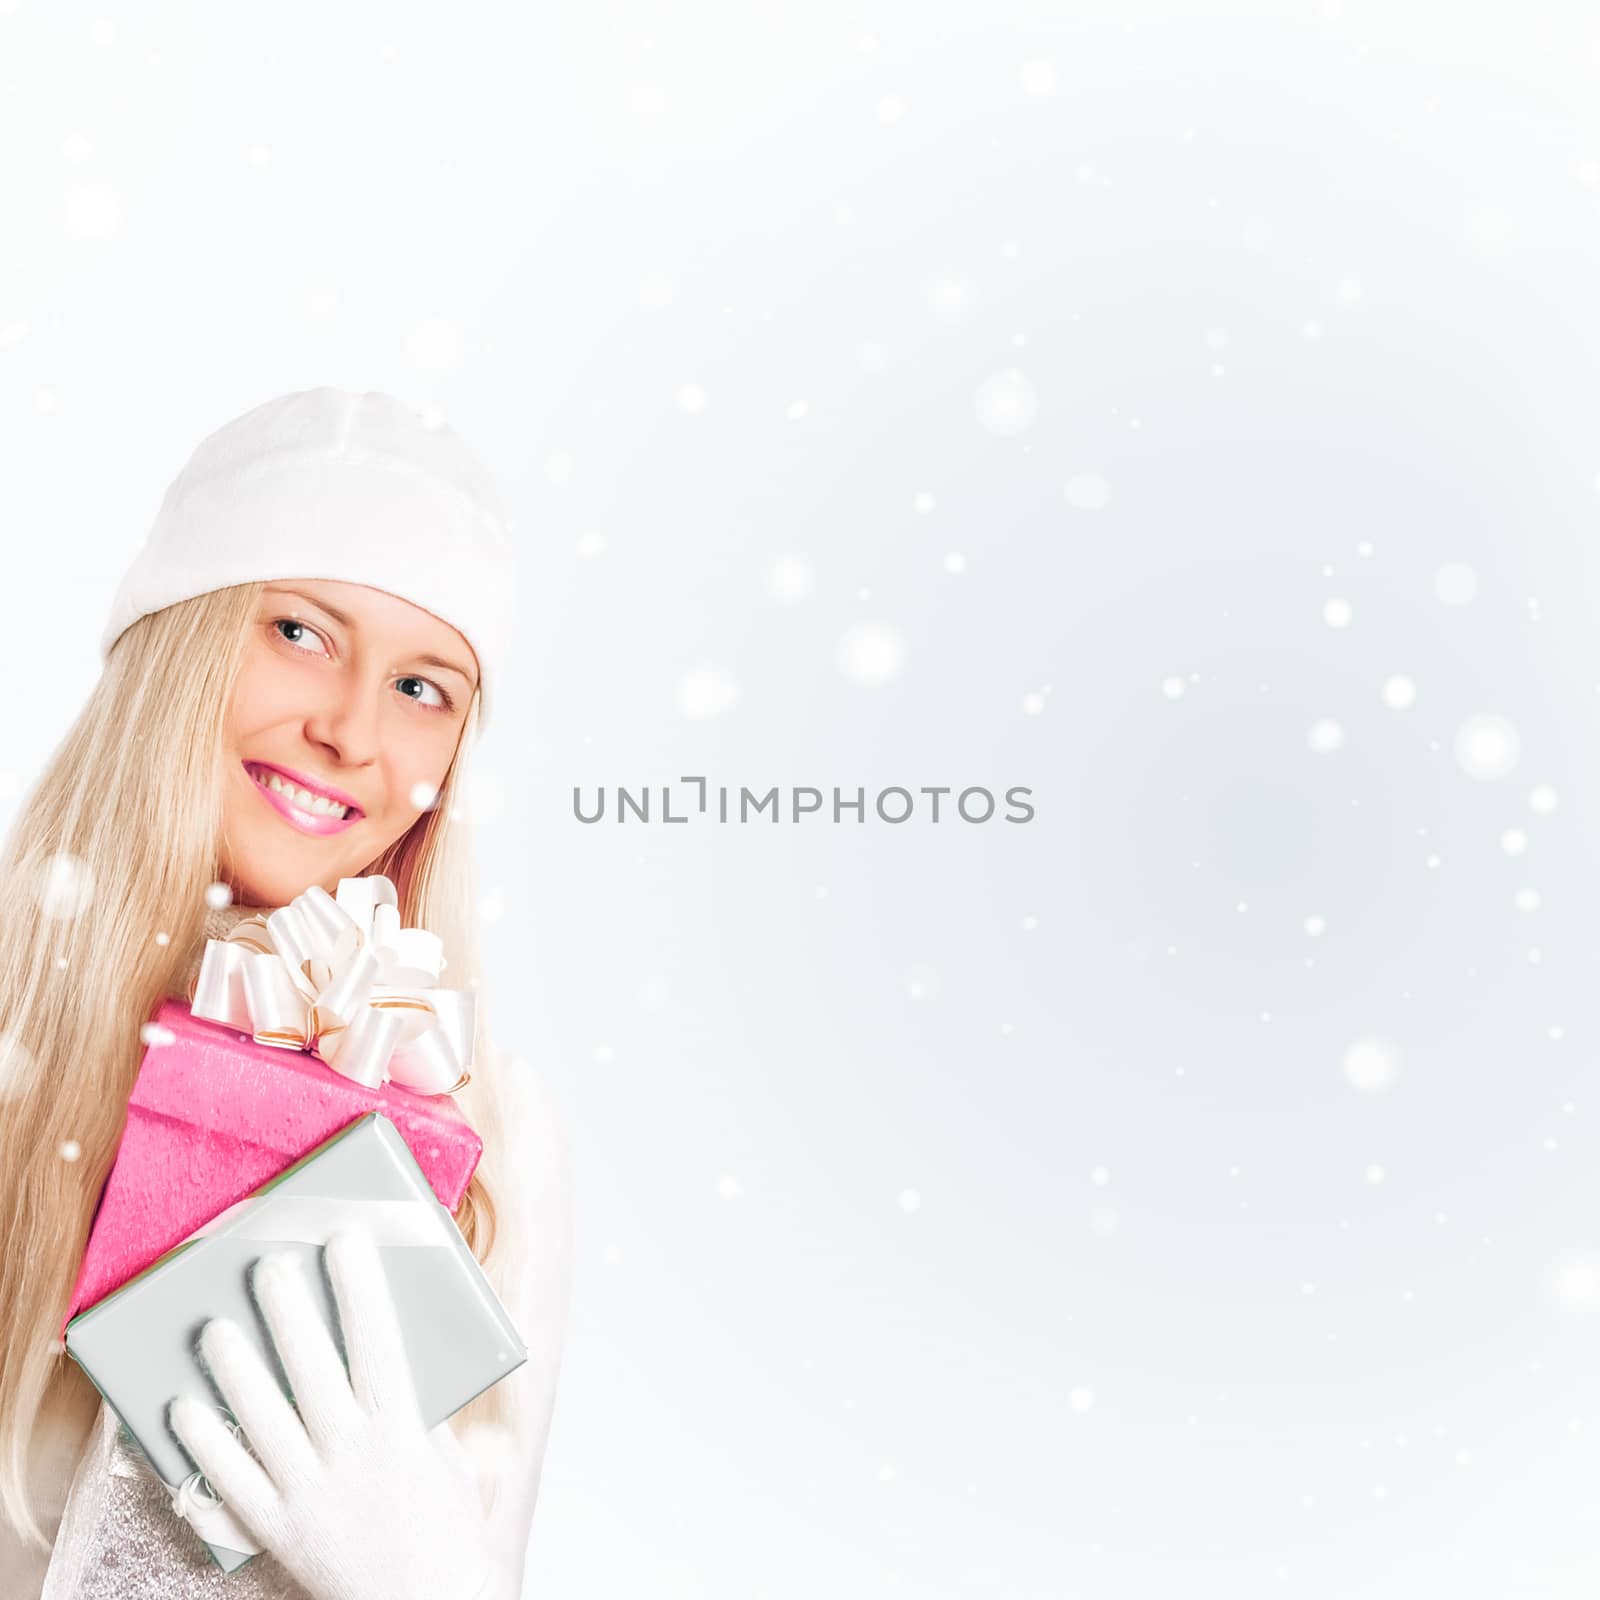 Happy woman holding Christmas gifts, silver background and snow  by Anneleven